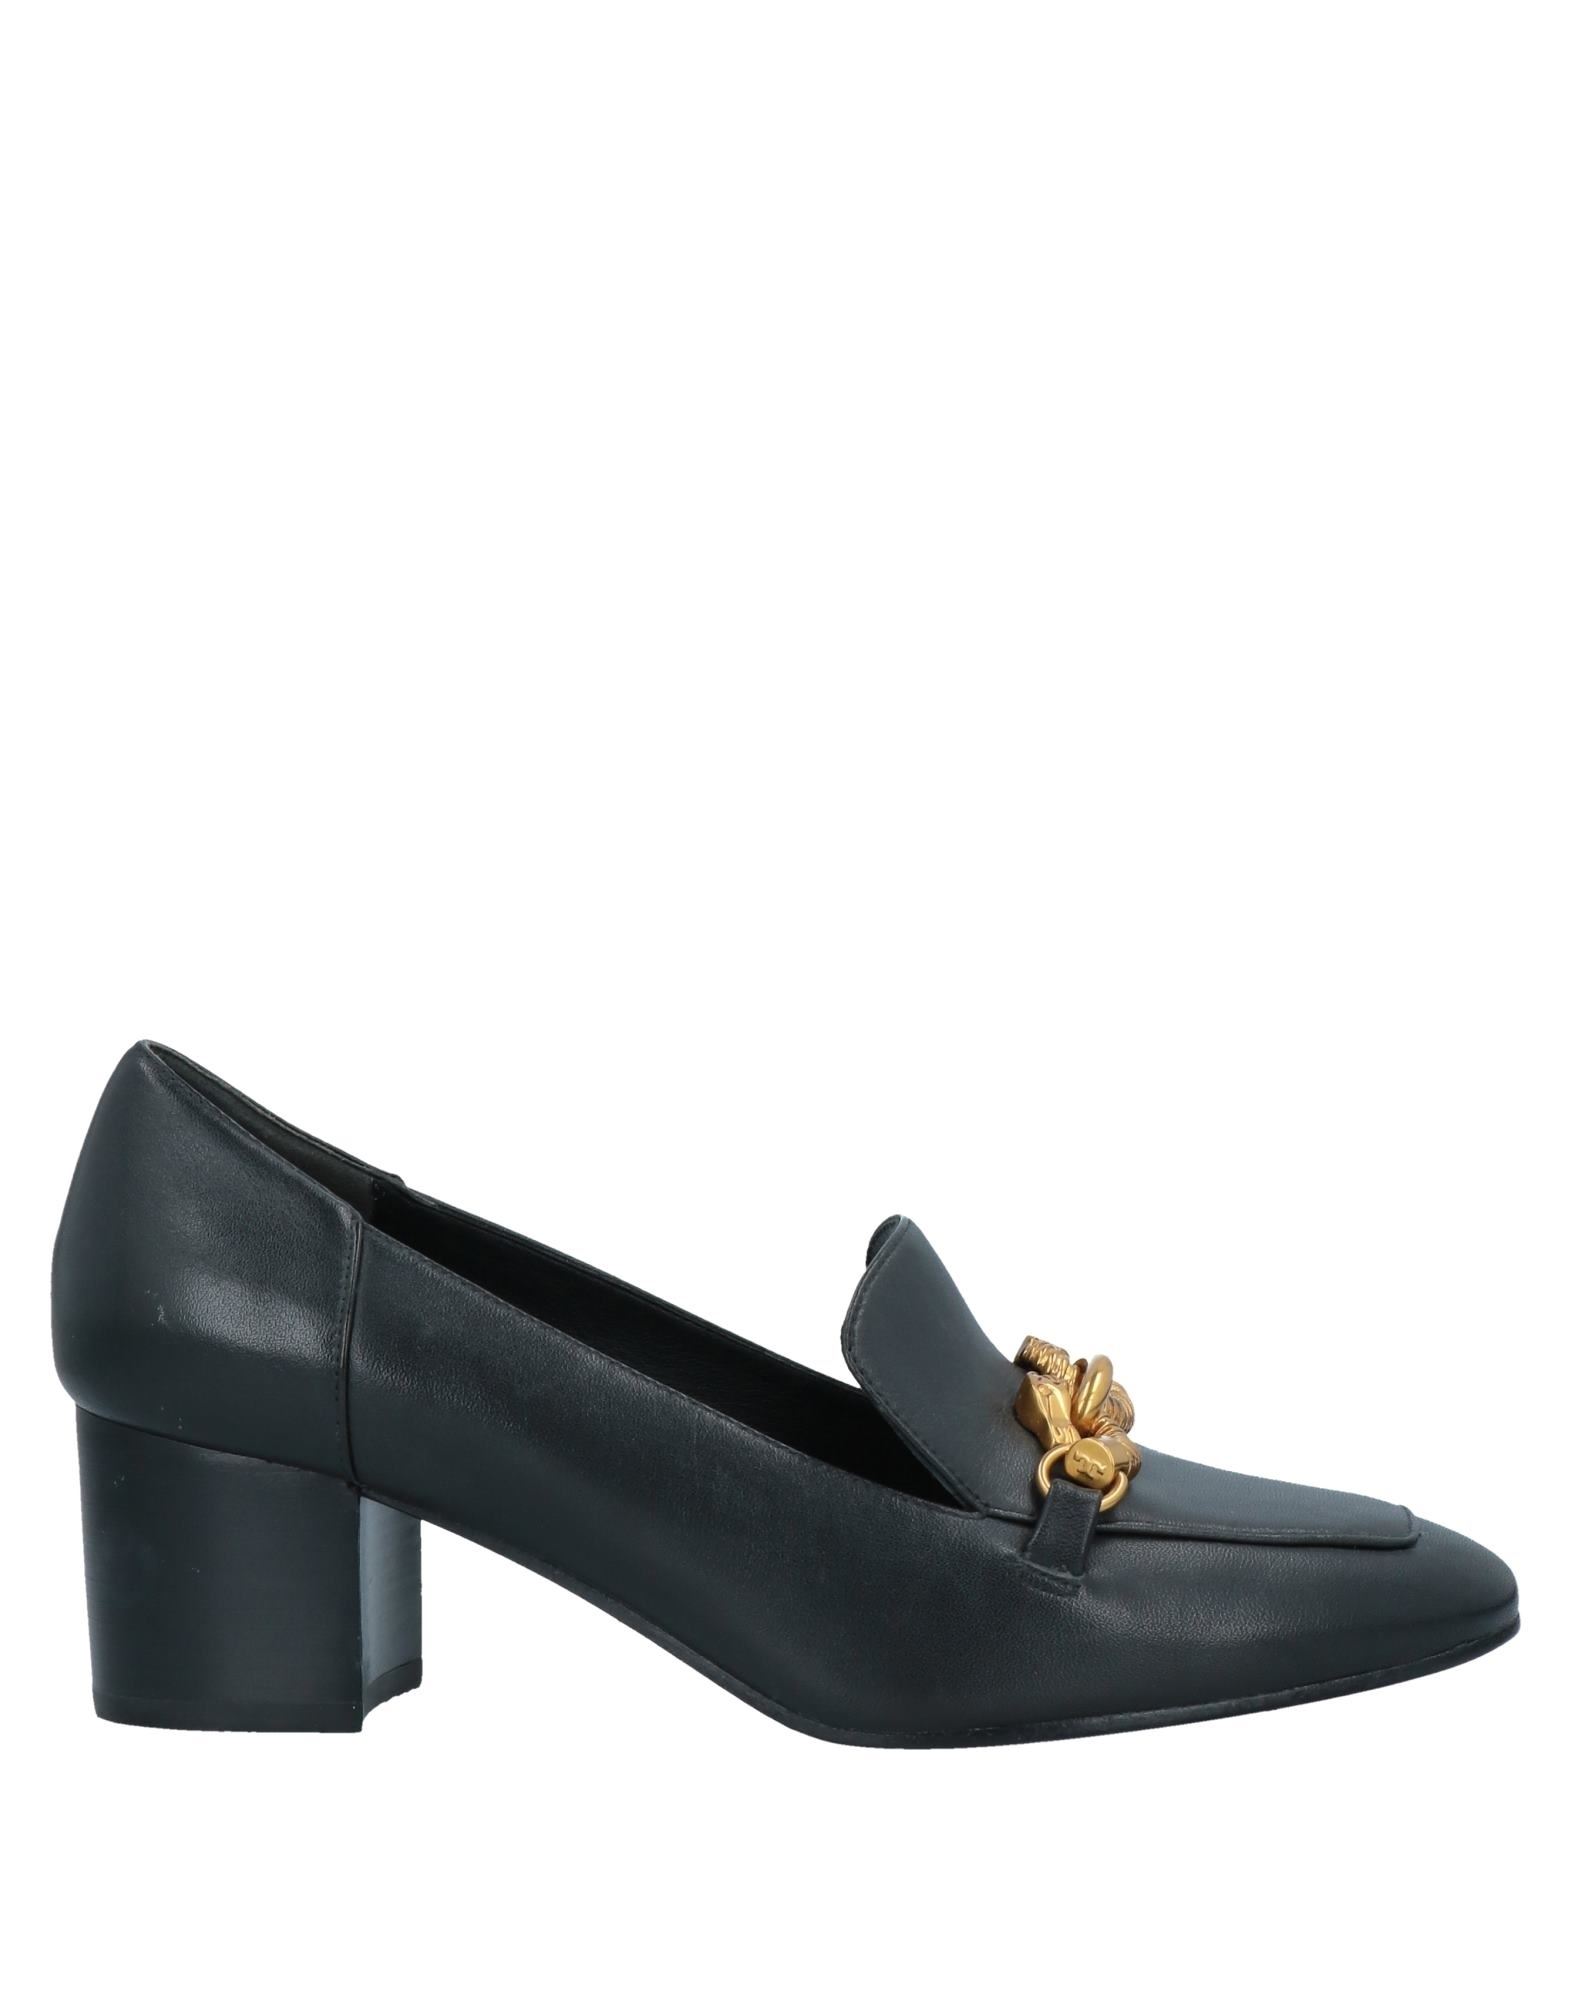 TORY BURCH Loafers - Item 11757064